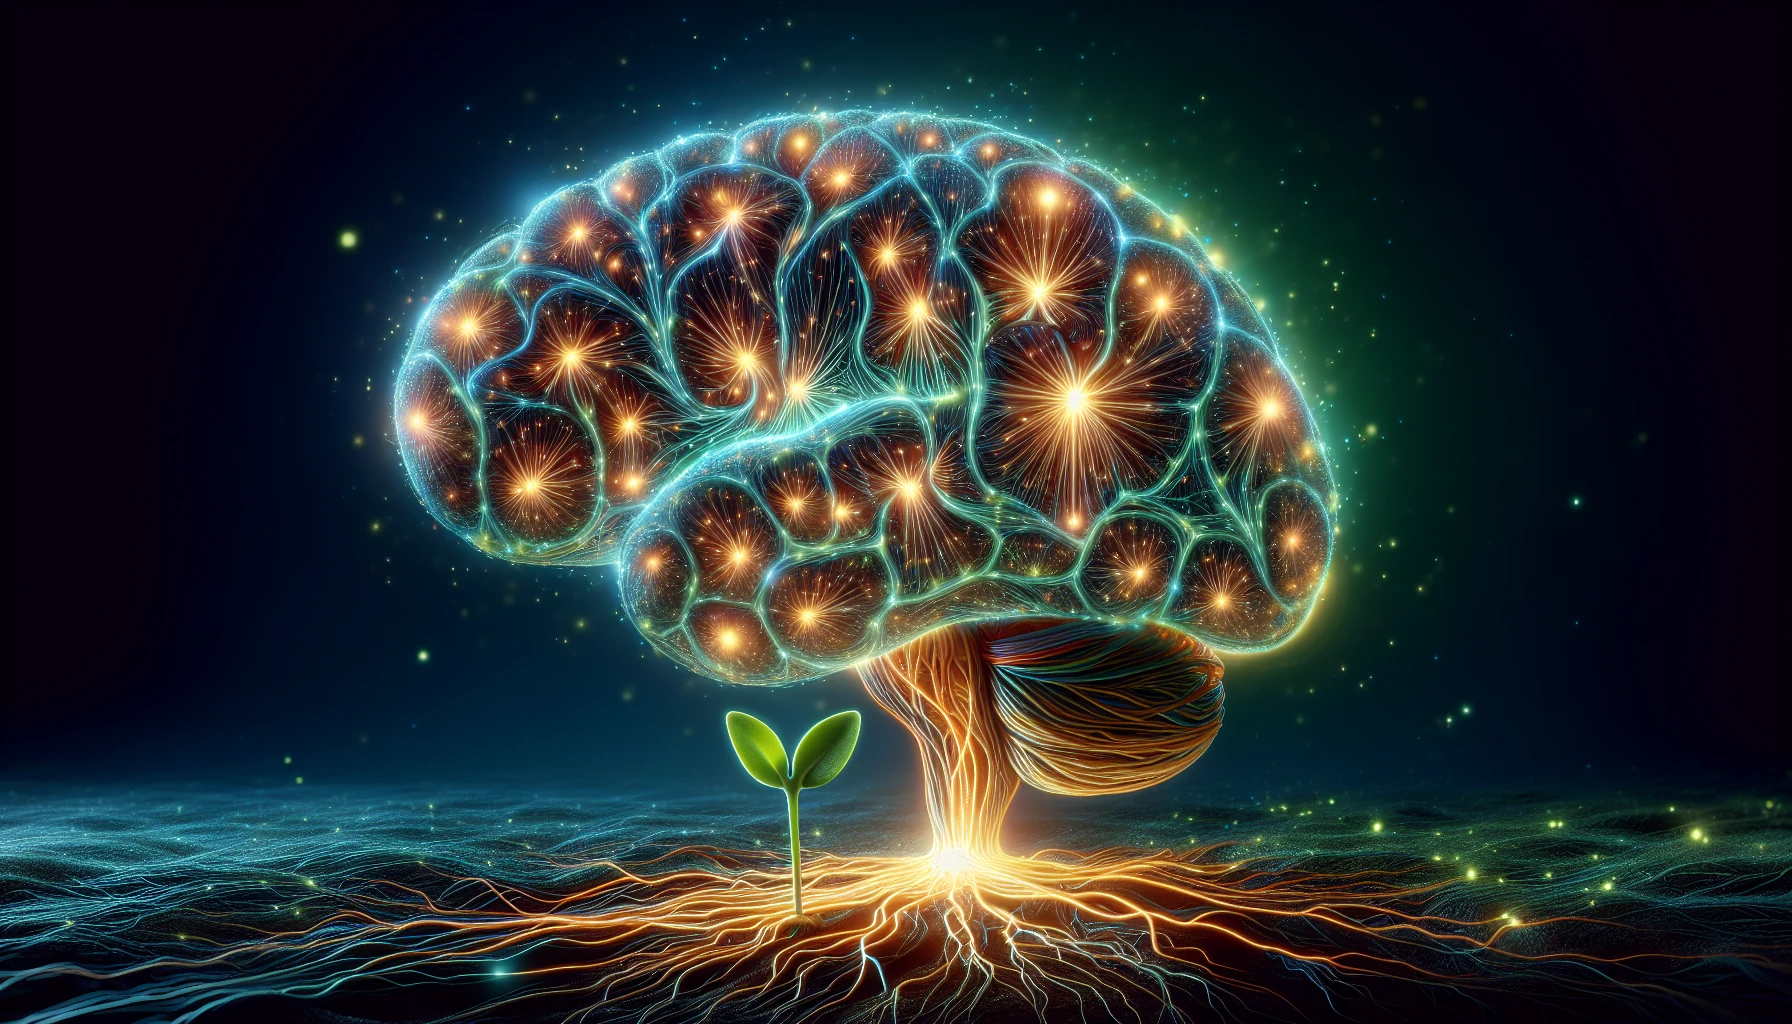 Illustration of a brain with neural connections representing the concept of brain plasticity and growth mindset